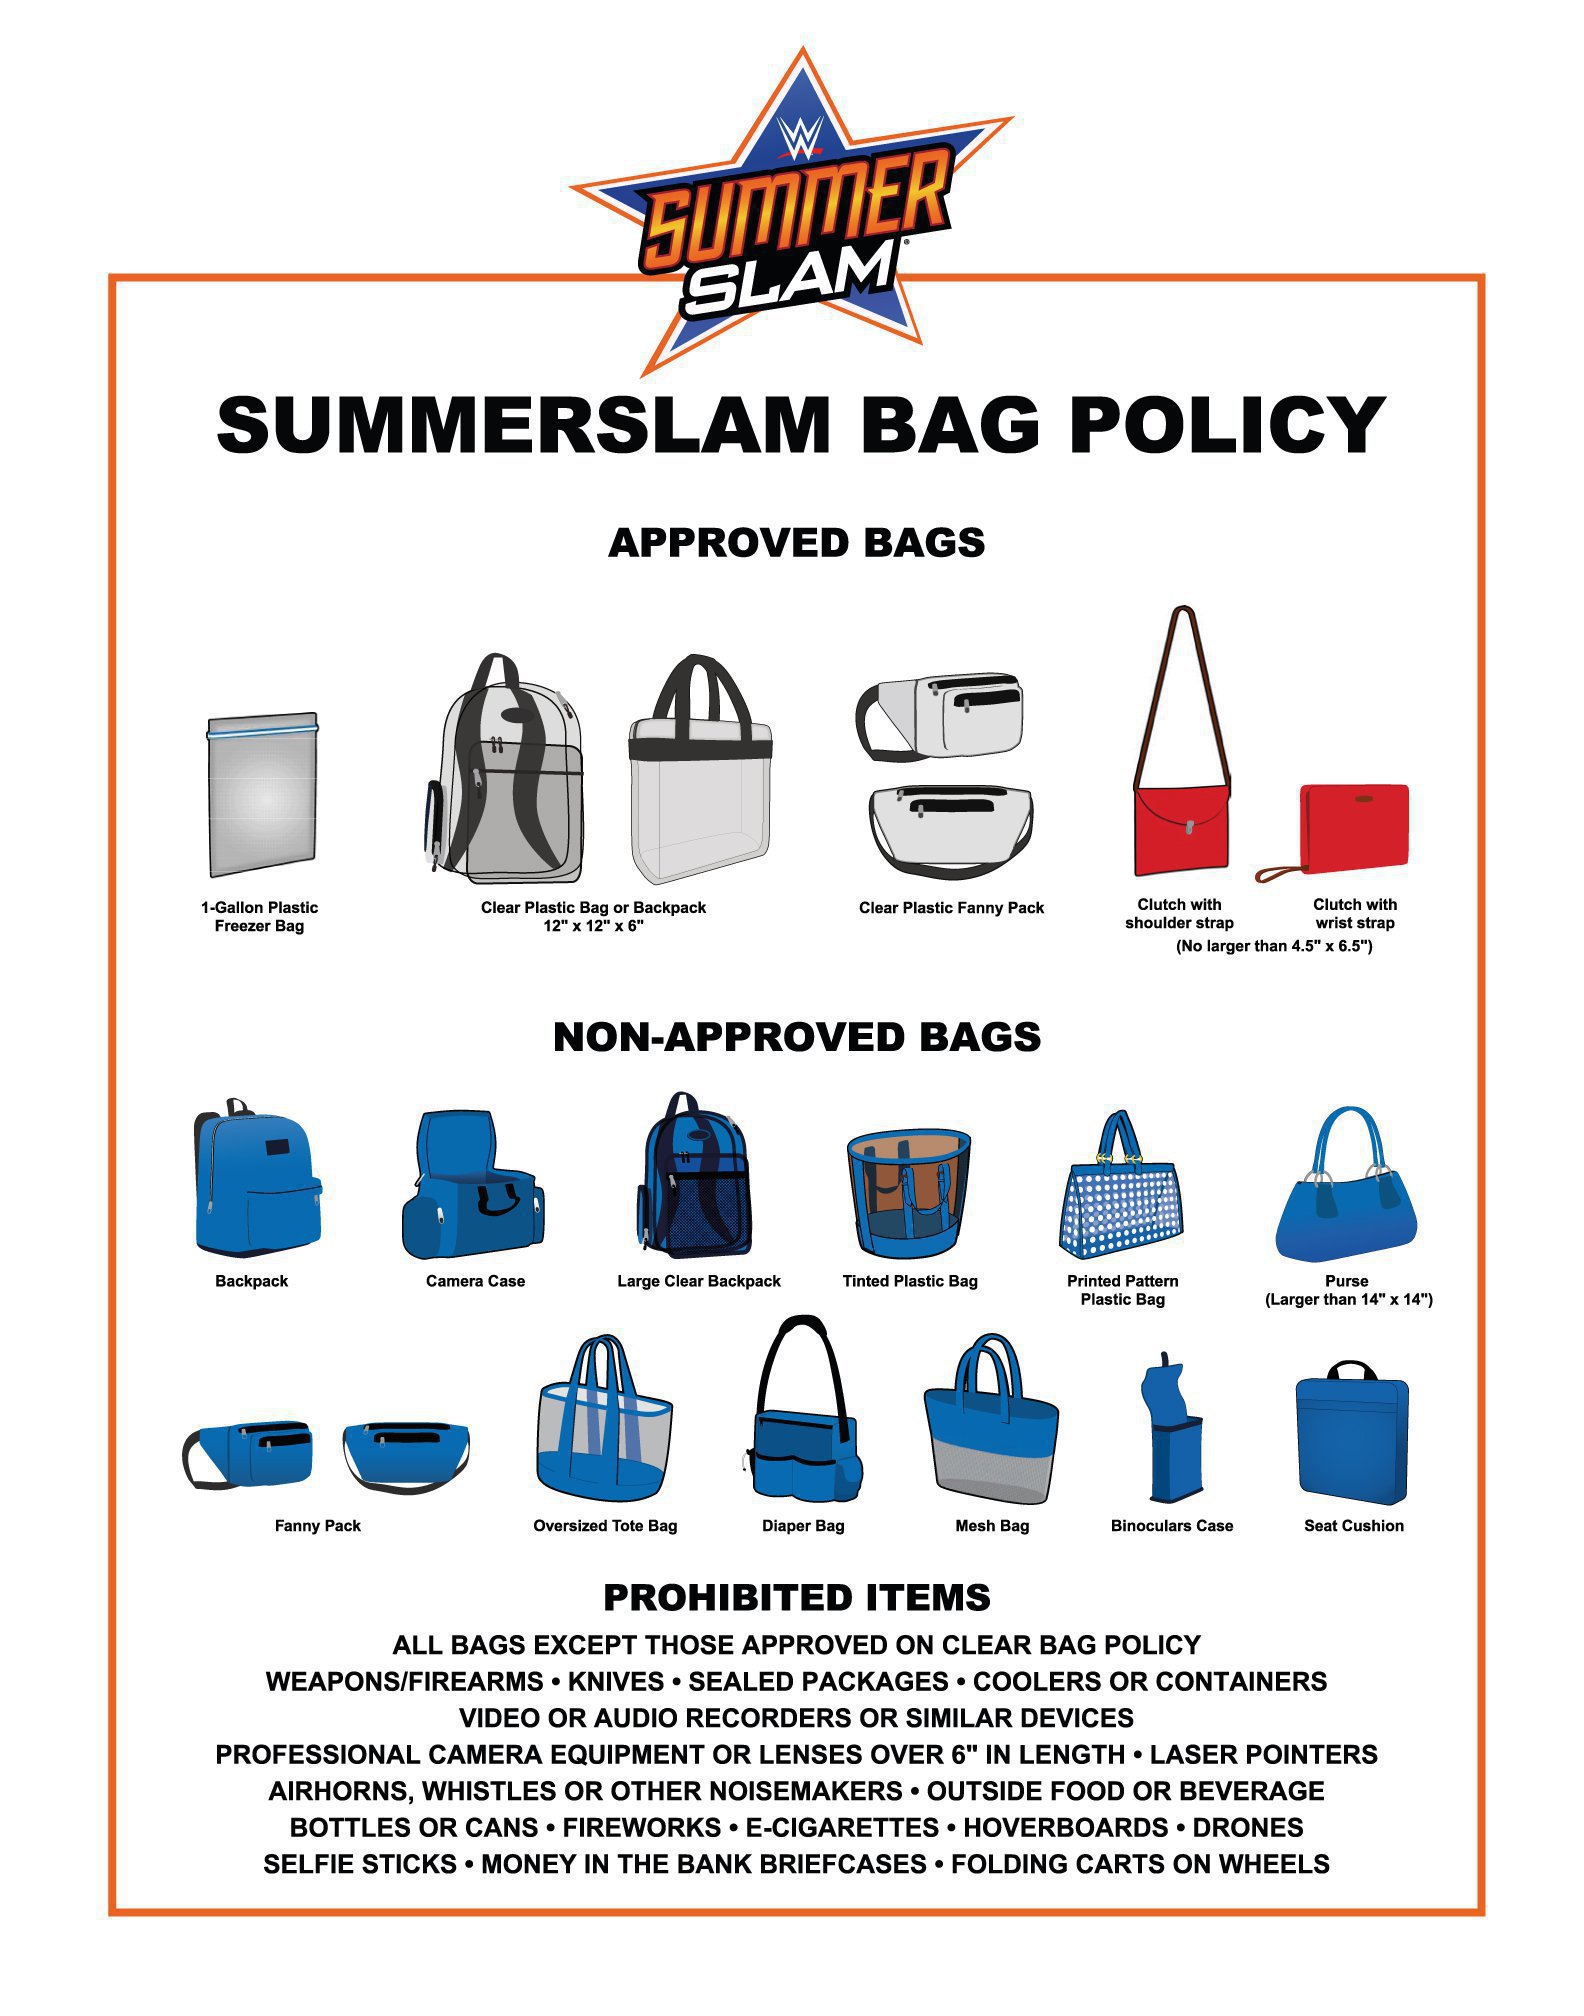 76467_SSlam_ClearBag_22x28_Policy_Sign--6016657be7af03b9cbfd407ecabc900a.jpg